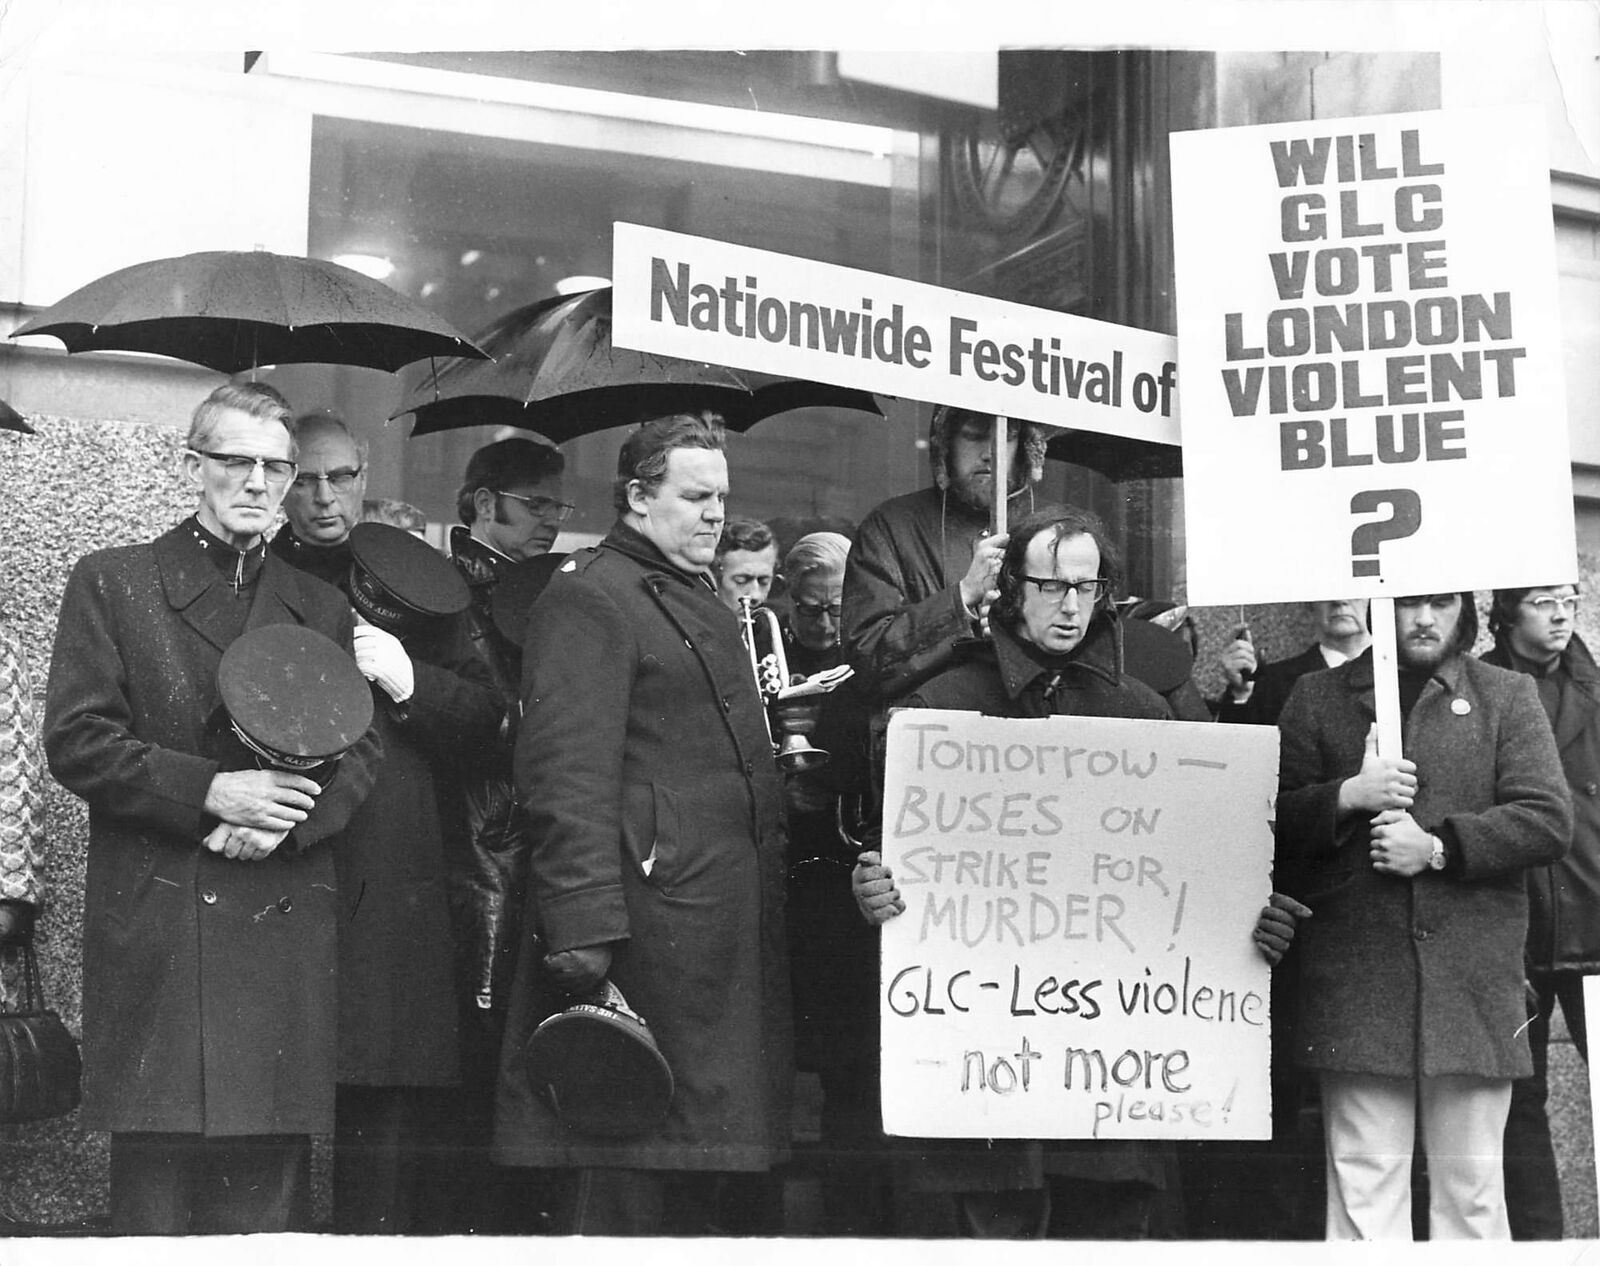 1975 Press Photo Men With Banners FESTIVAL OF LIGHT London GLC Protest kg